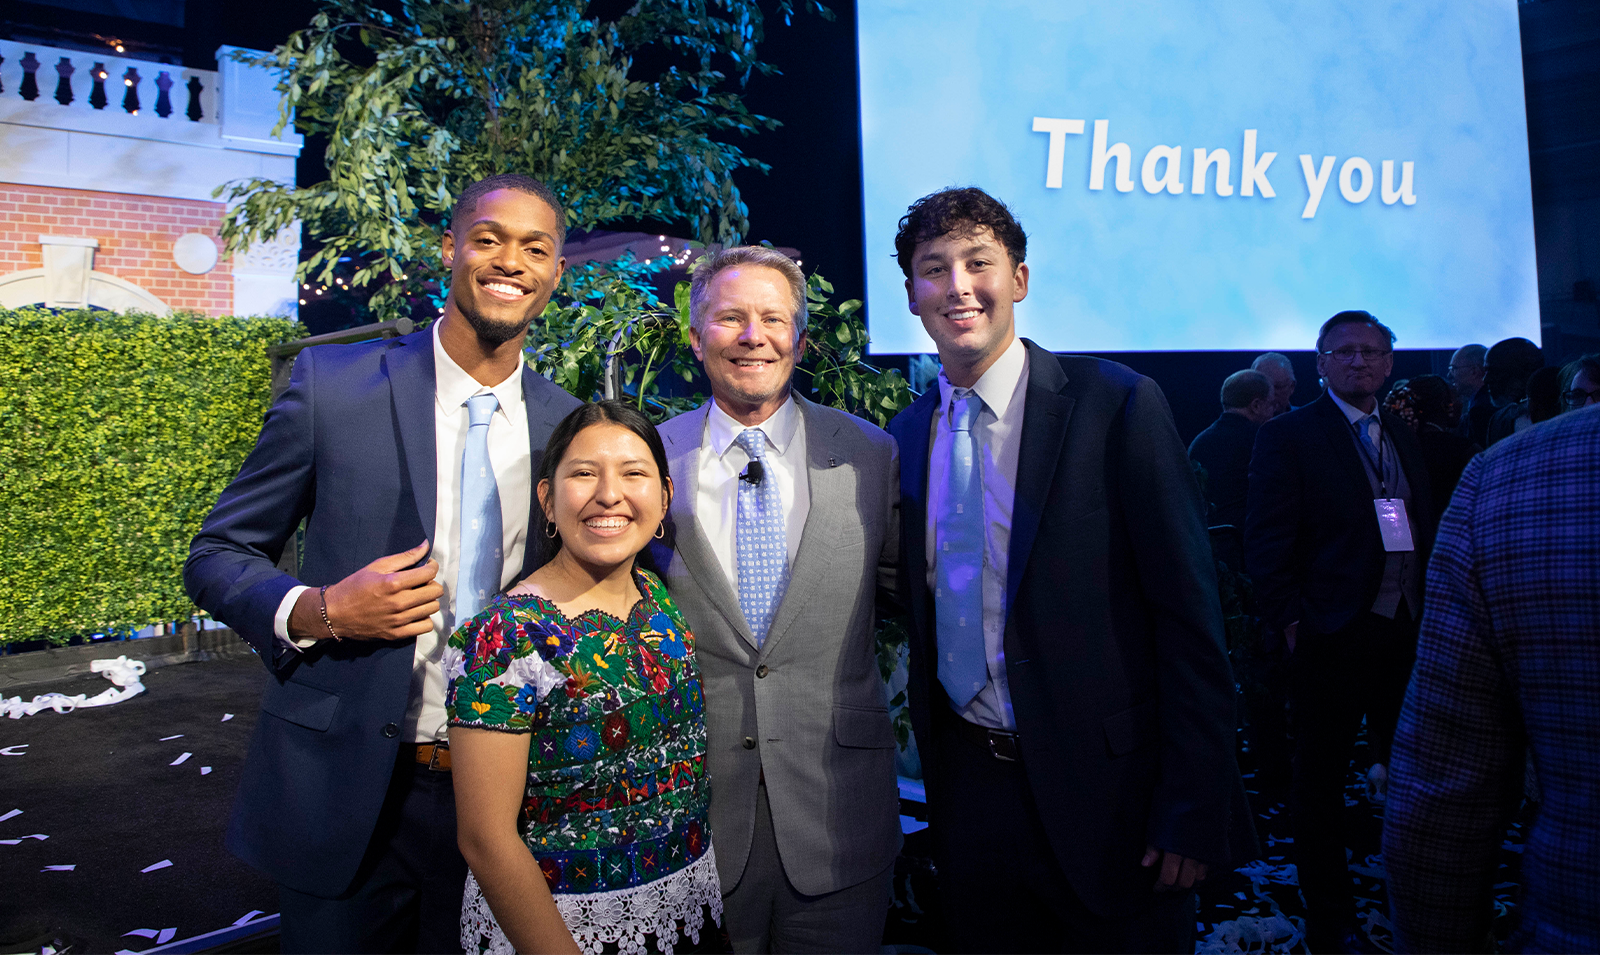 Chancellor Kevin M. Guskiewicz posing with three students at a fundraiser celebration event. In the background on a projector screen is a slide reading 